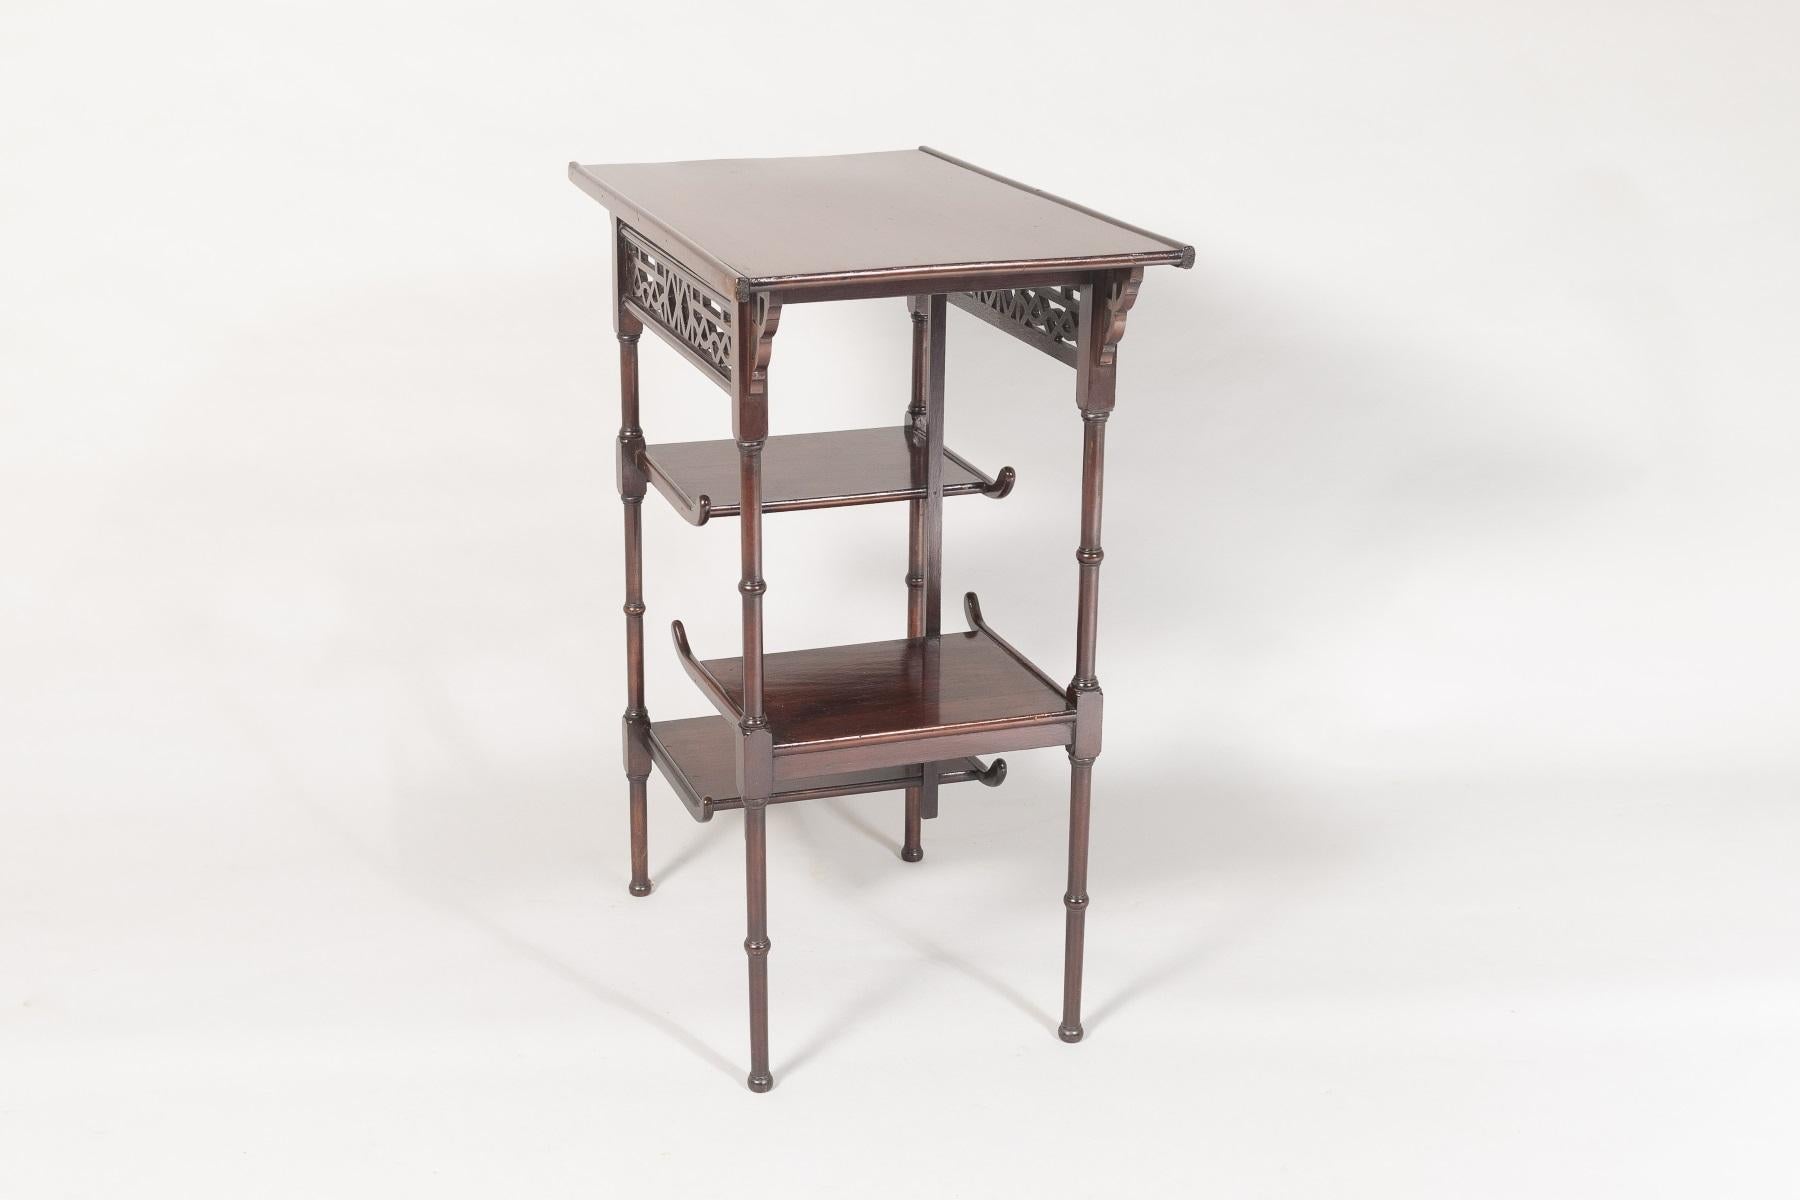 British Antique Anglo-Japanese Pagoda Side Table in the manner of E W Godwin For Sale